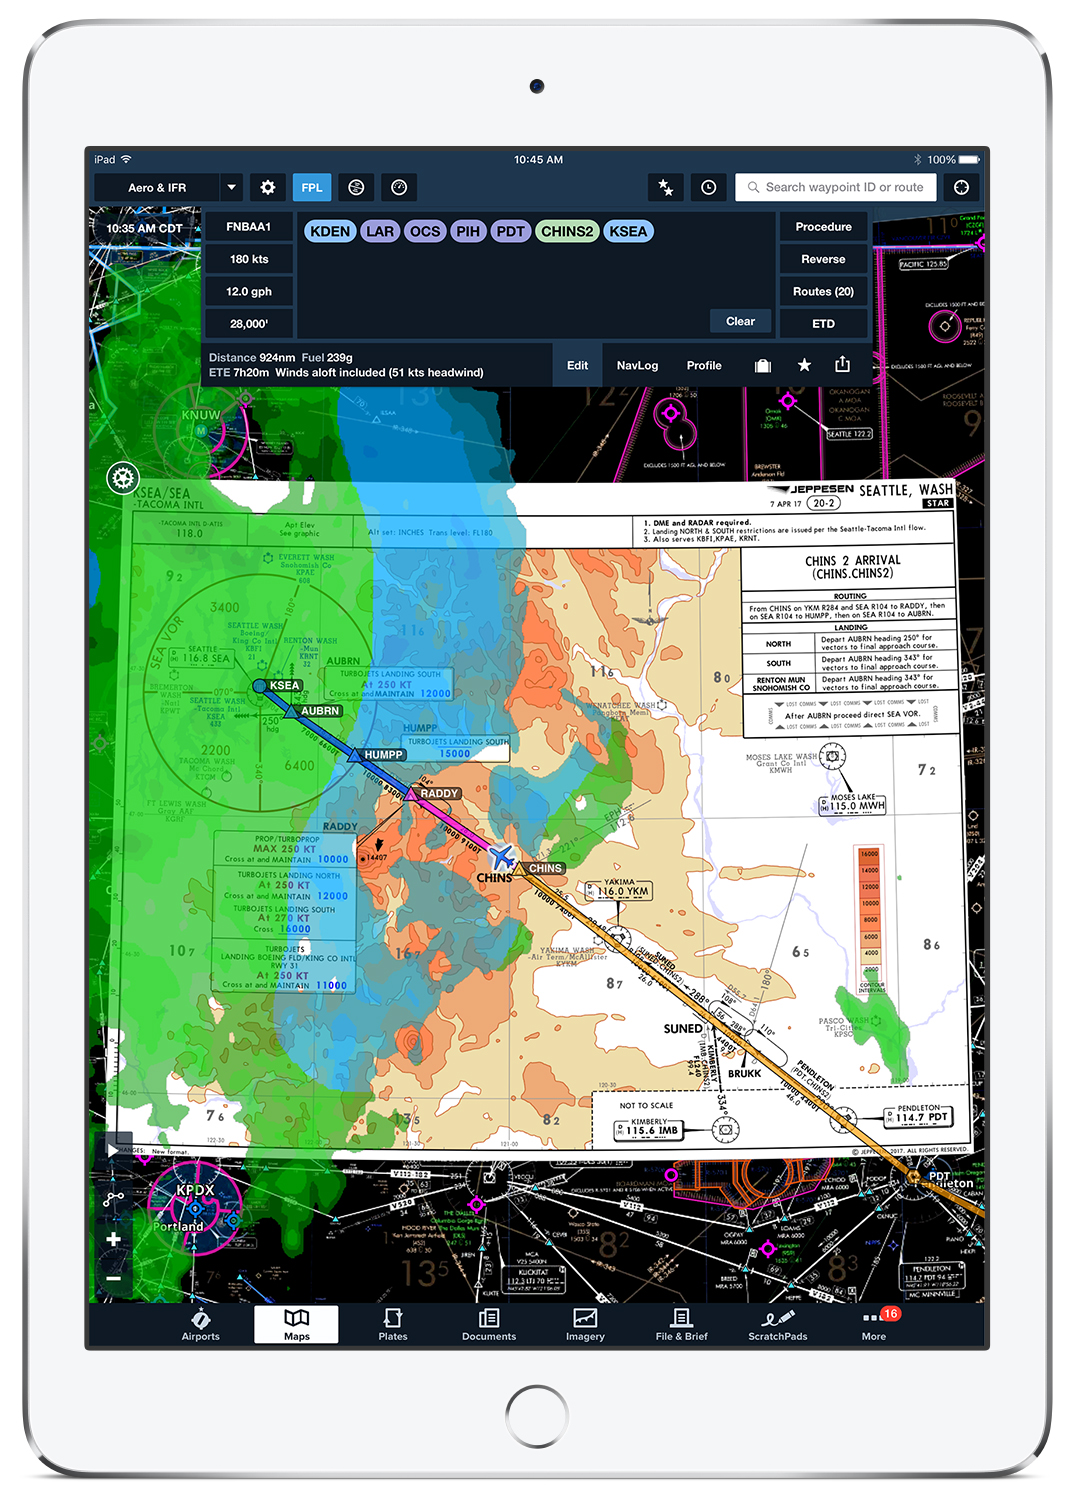 Weather can be displayed over Jeppesen charts to enhance situational awareness for pilots. Image courtesy of ForeFlight.